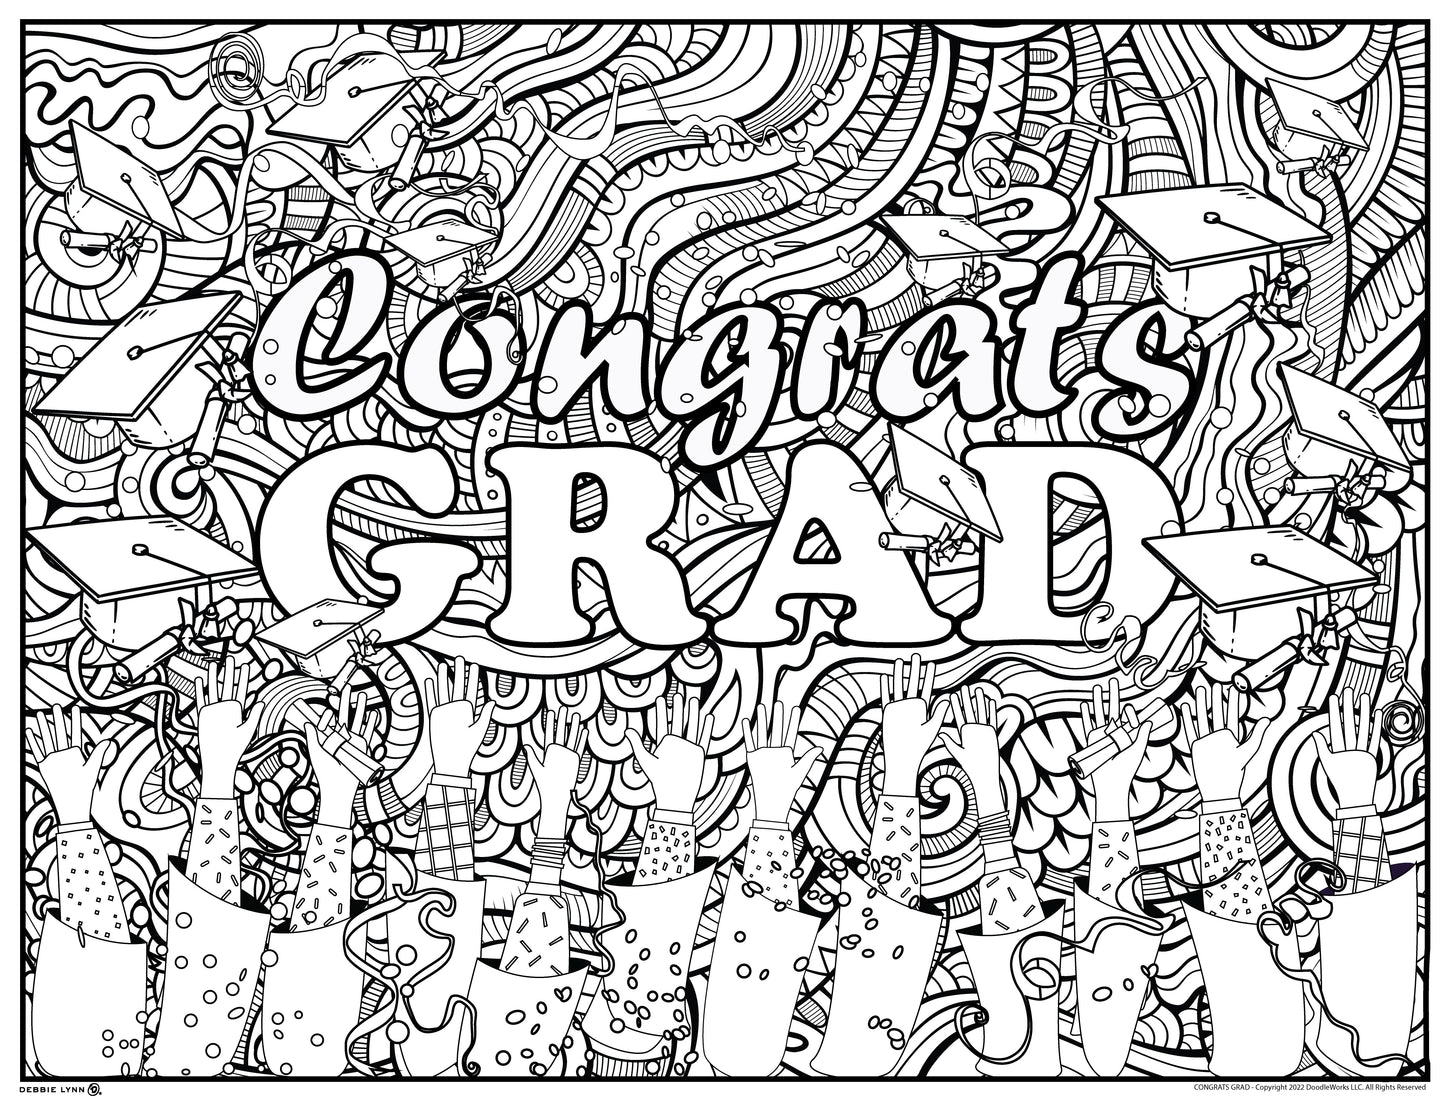 Congrats Grad Personalized Giant Coloring Poster 46"x60"